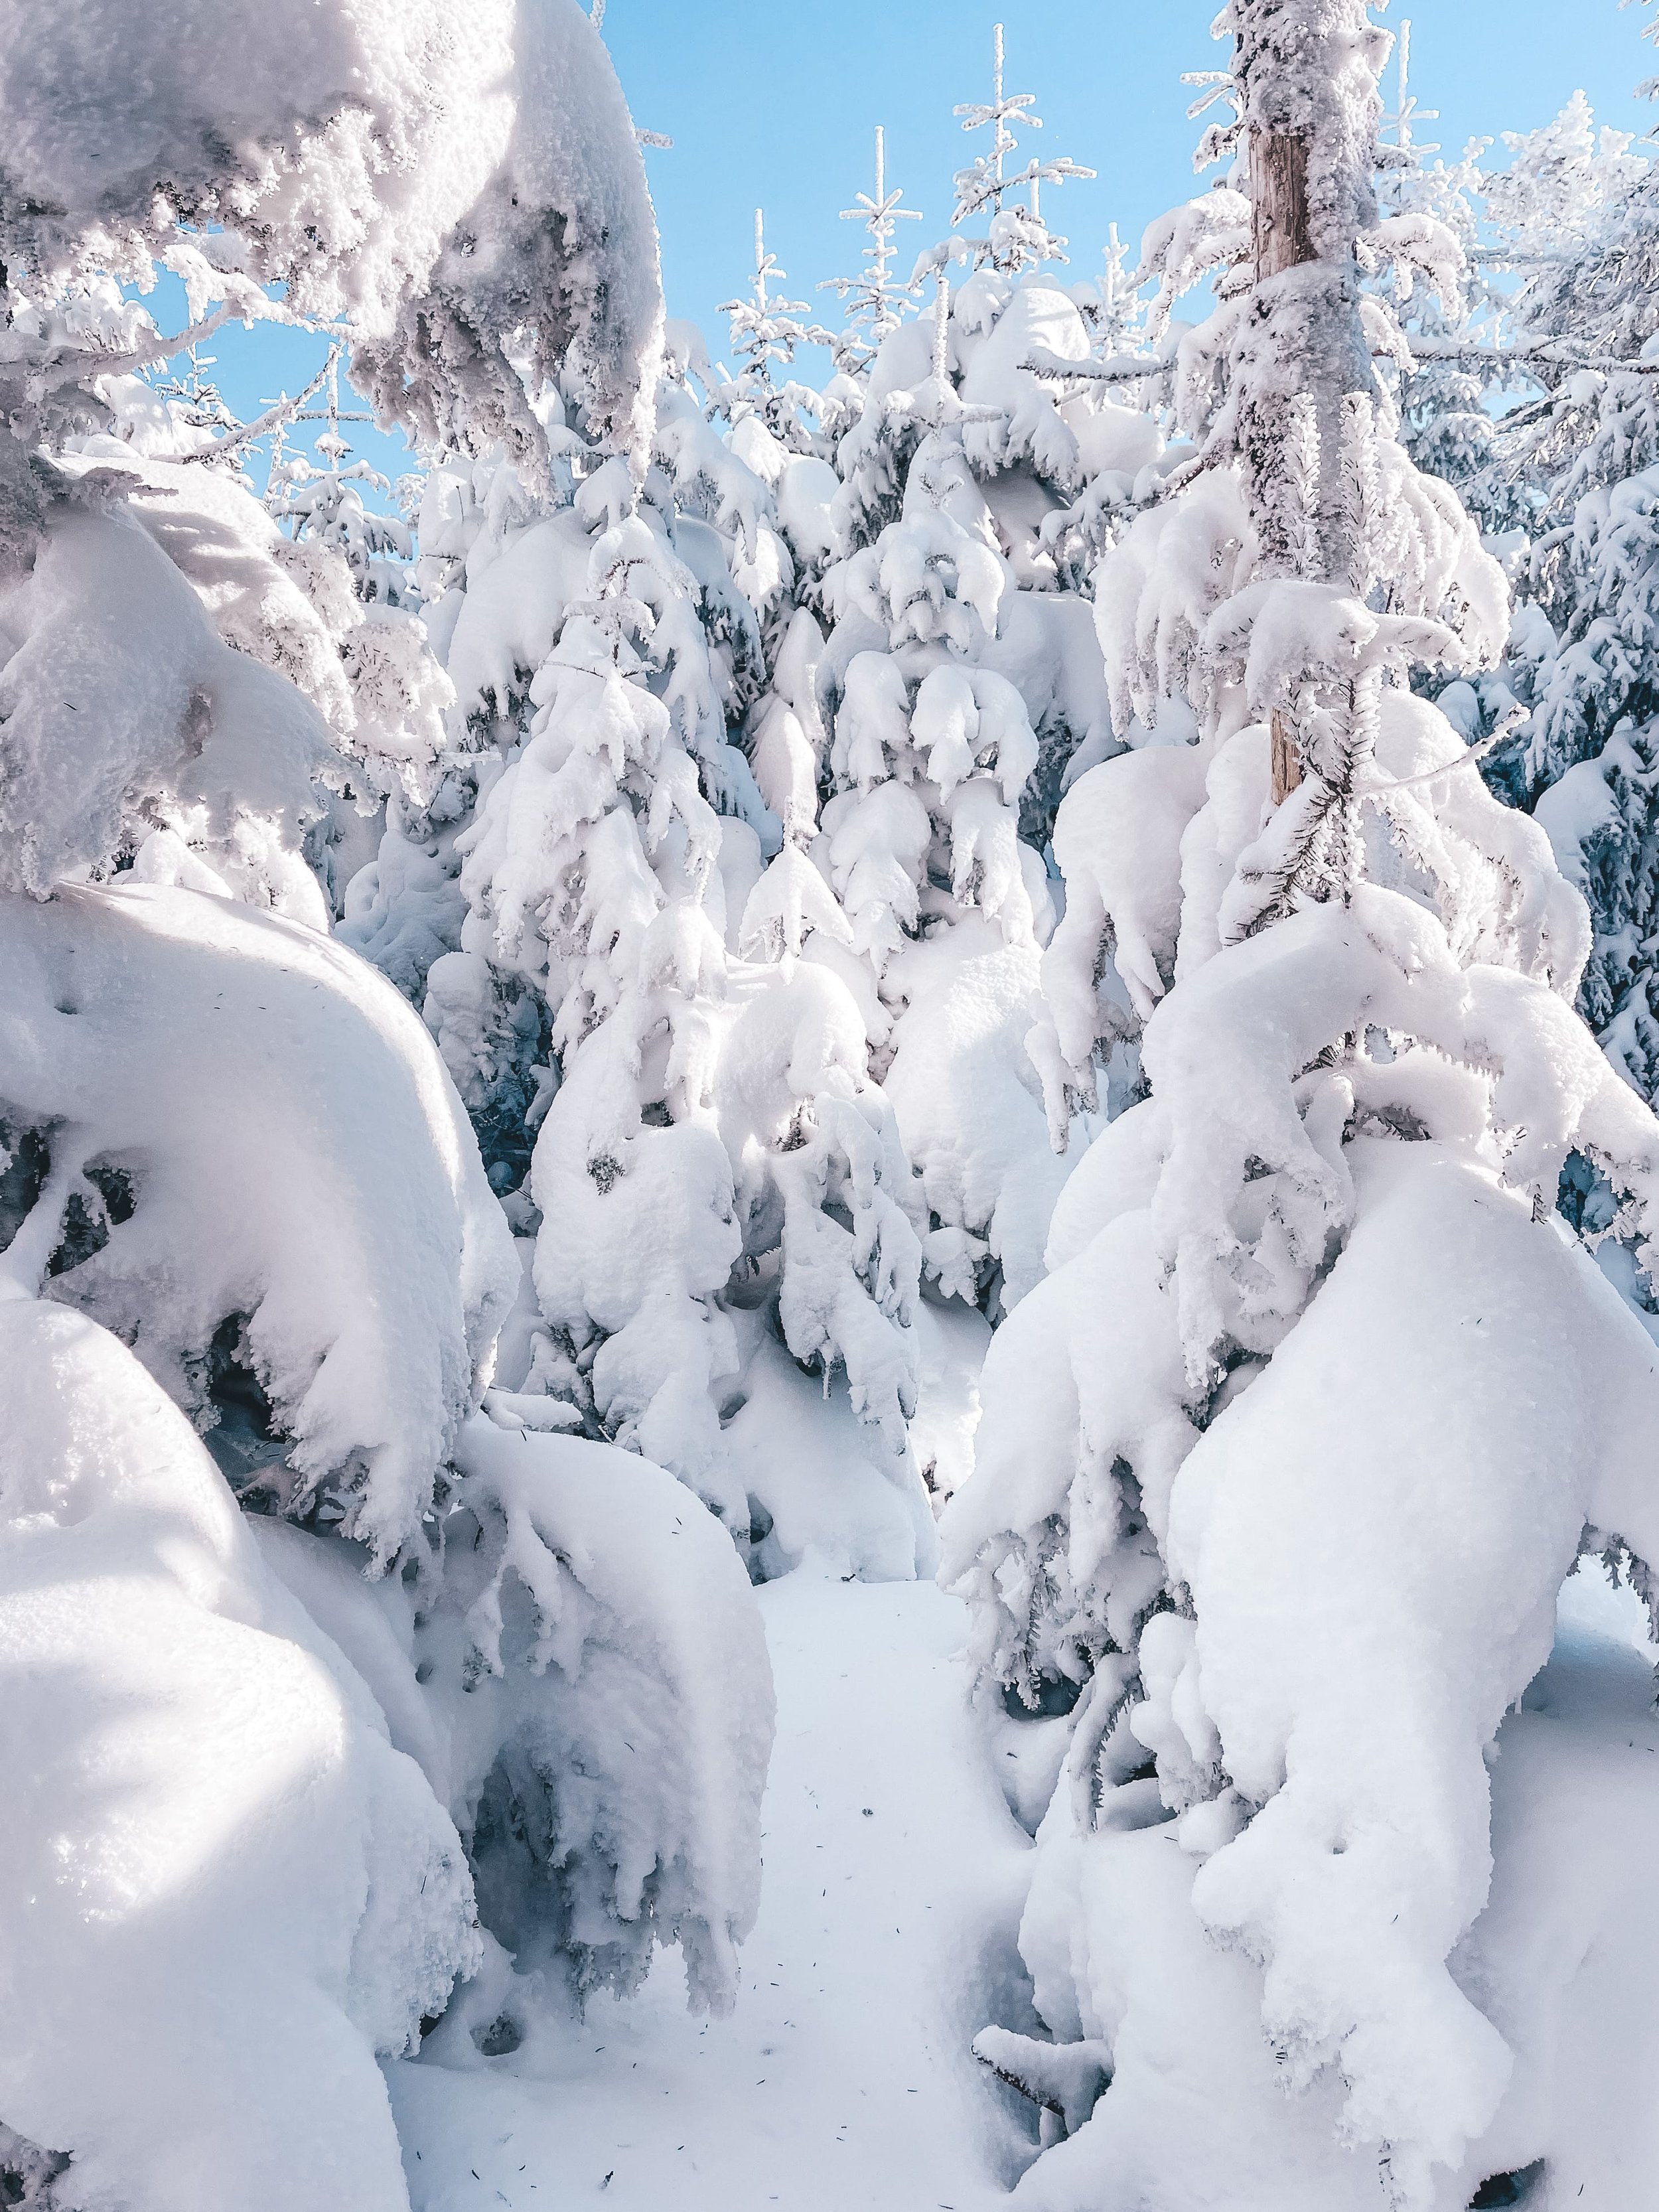 Trees covered in snow - Mount Gosford - Eastern Townships - Quebec - Canada